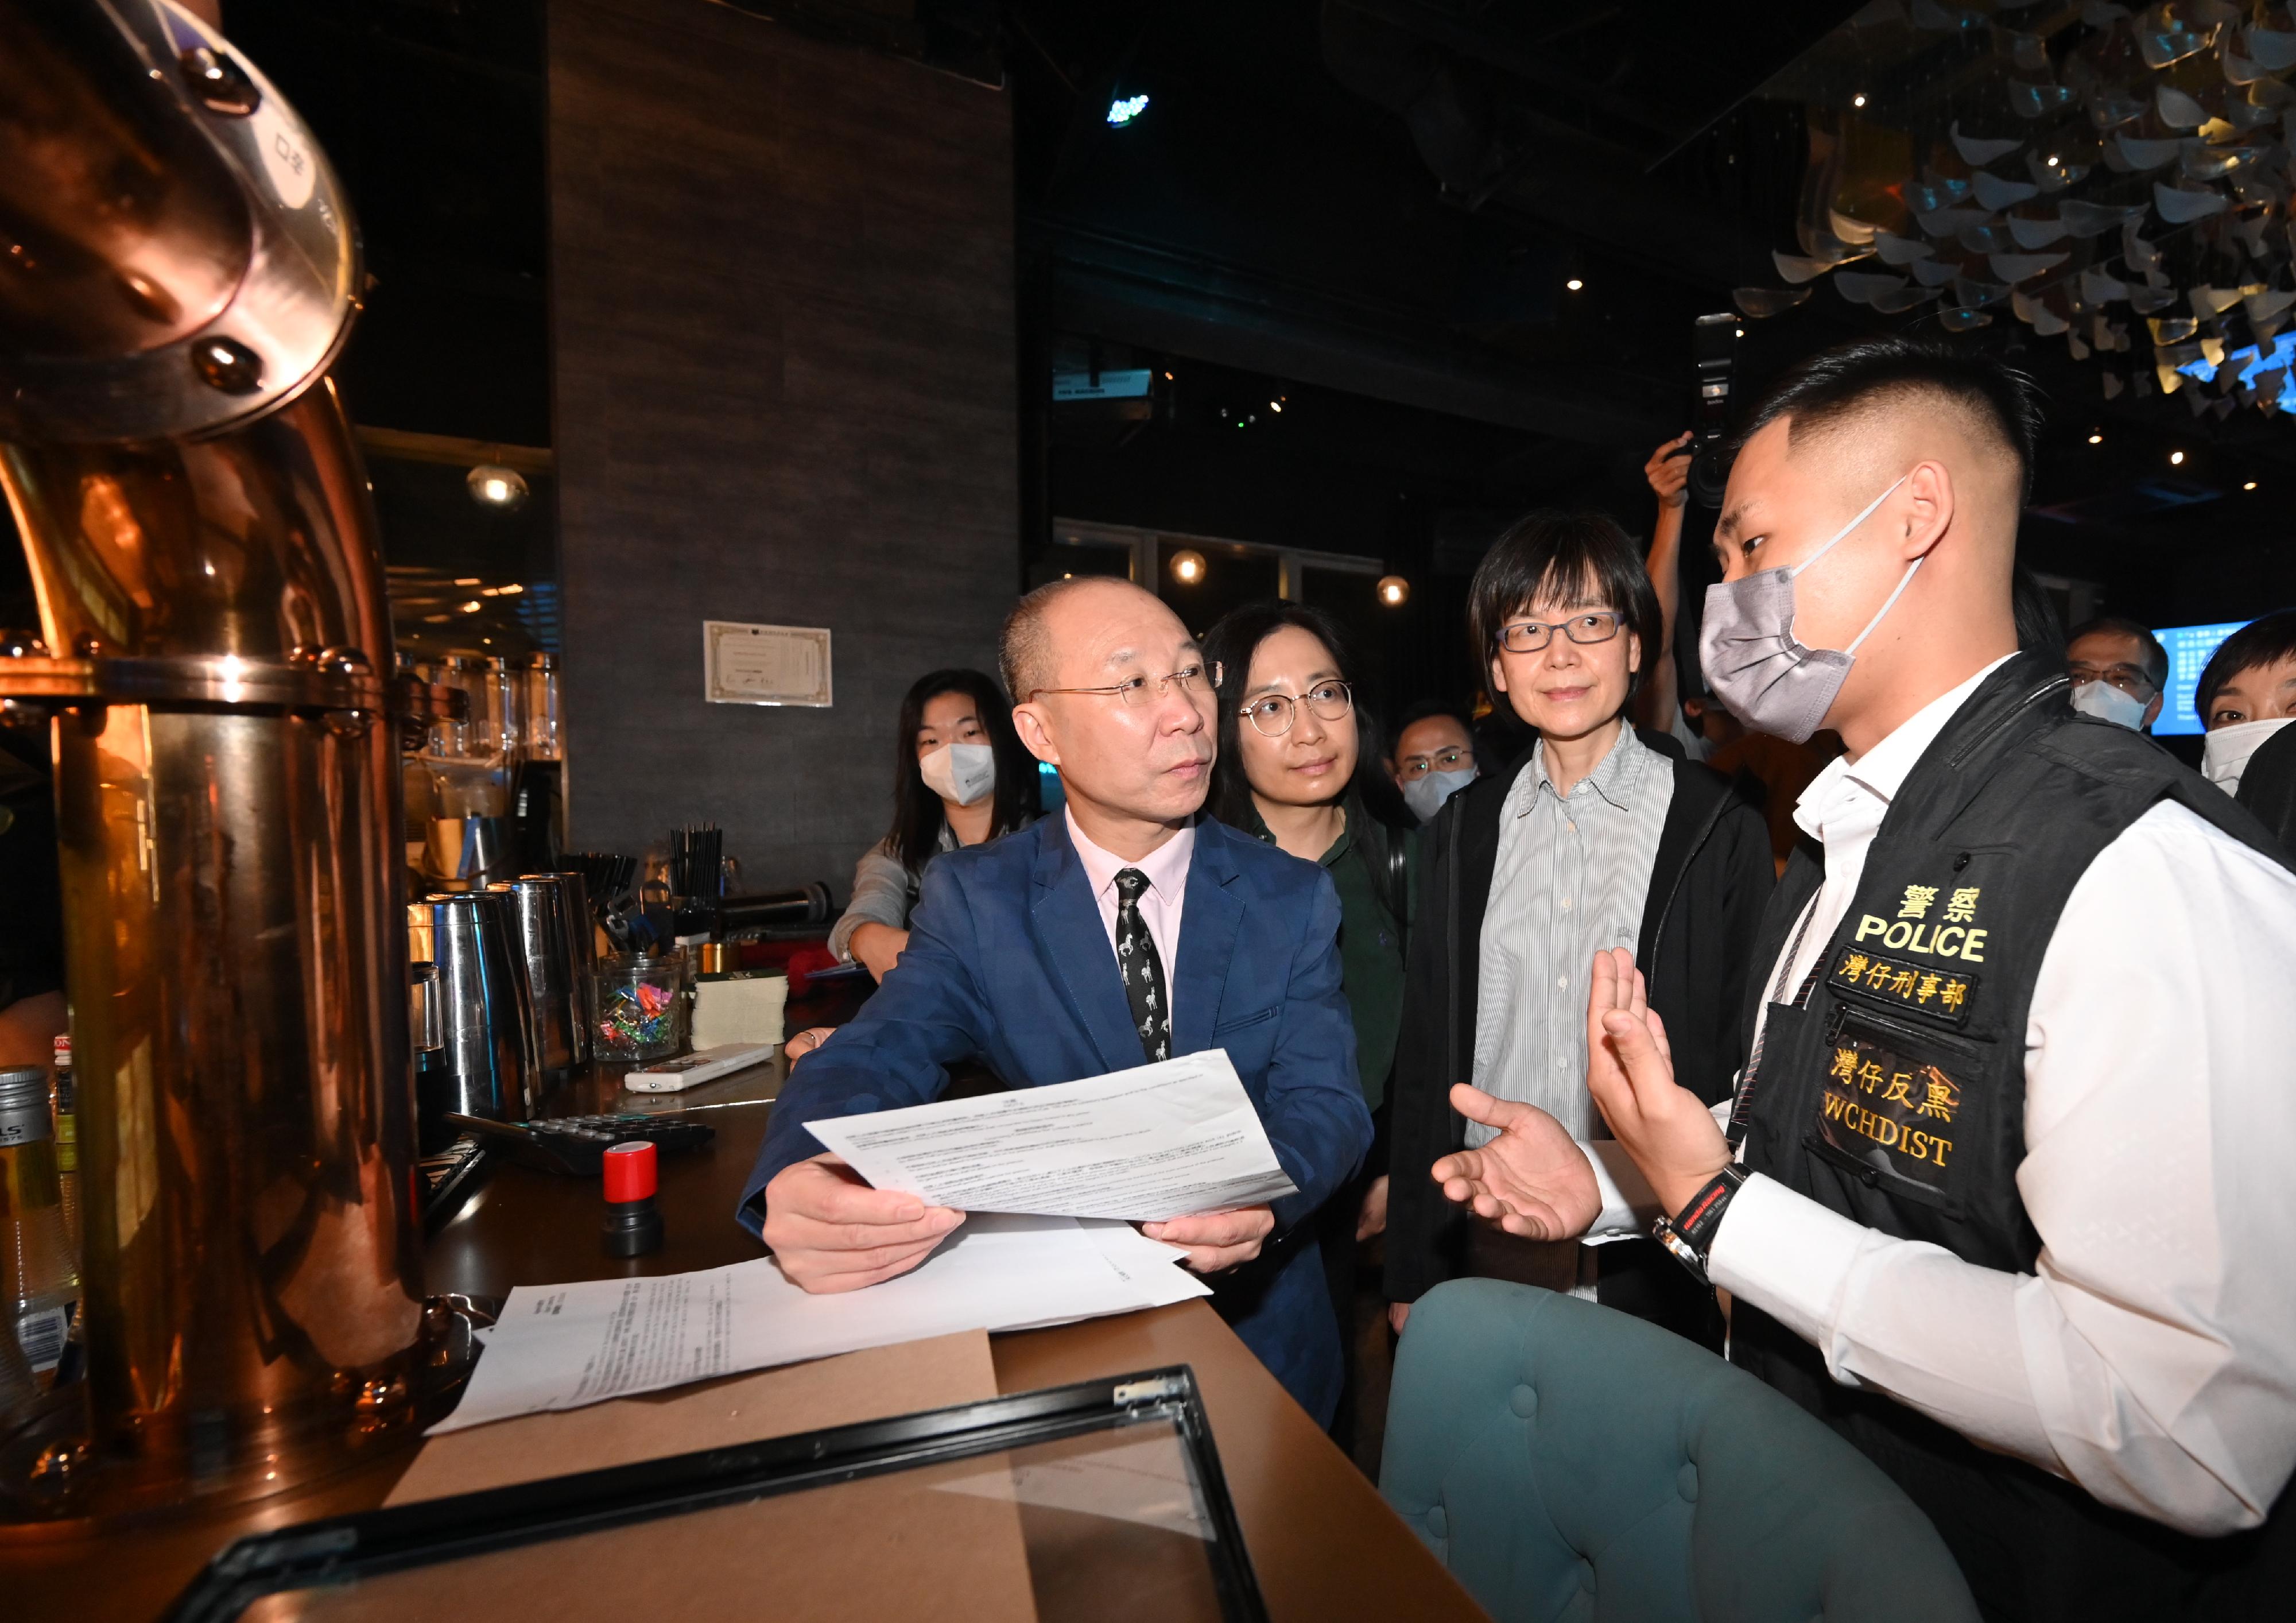 Members of the Liquor Licensing Board, led by the Board Chairman, Dr Wong Kong-tin, visited a number of different types of premises with liquor licences in Wan Chai District and Tsim Sha Tsui District in the small hours today (March 12) to learn more about the operation of the premises and enforcement action by the Police. Photo shows (from left) Dr Wong; the Director of Food and Environmental Hygiene, Ms Irene Young; and the Permanent Secretary for Environment and Ecology (Food), Miss Vivian Lau, being briefed by a representative of the Police.
